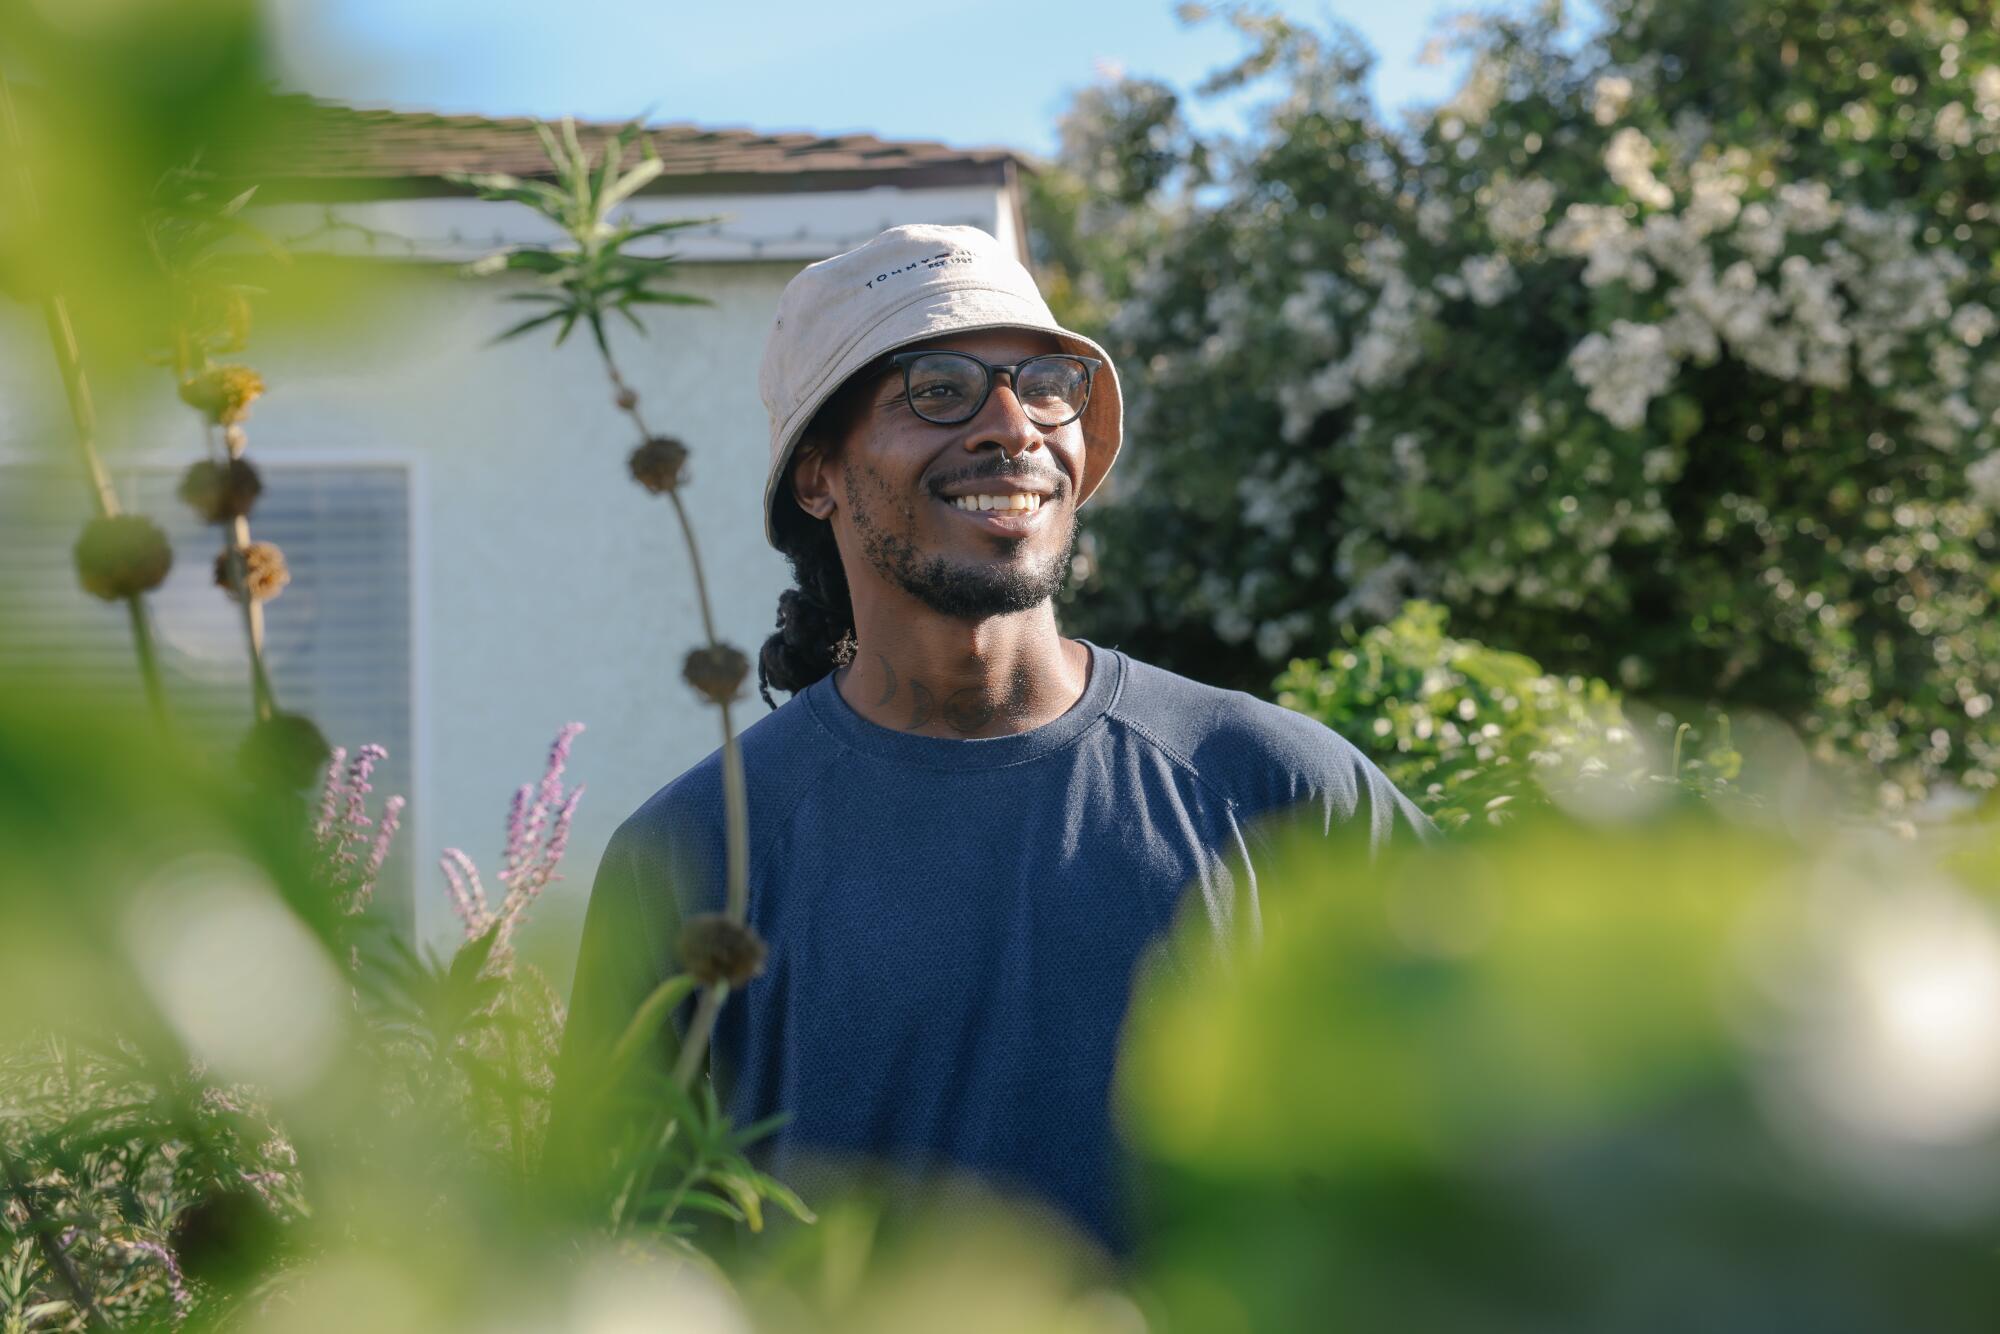 A smiling man in a bucket hat stands outside smiling, surrounded by plants